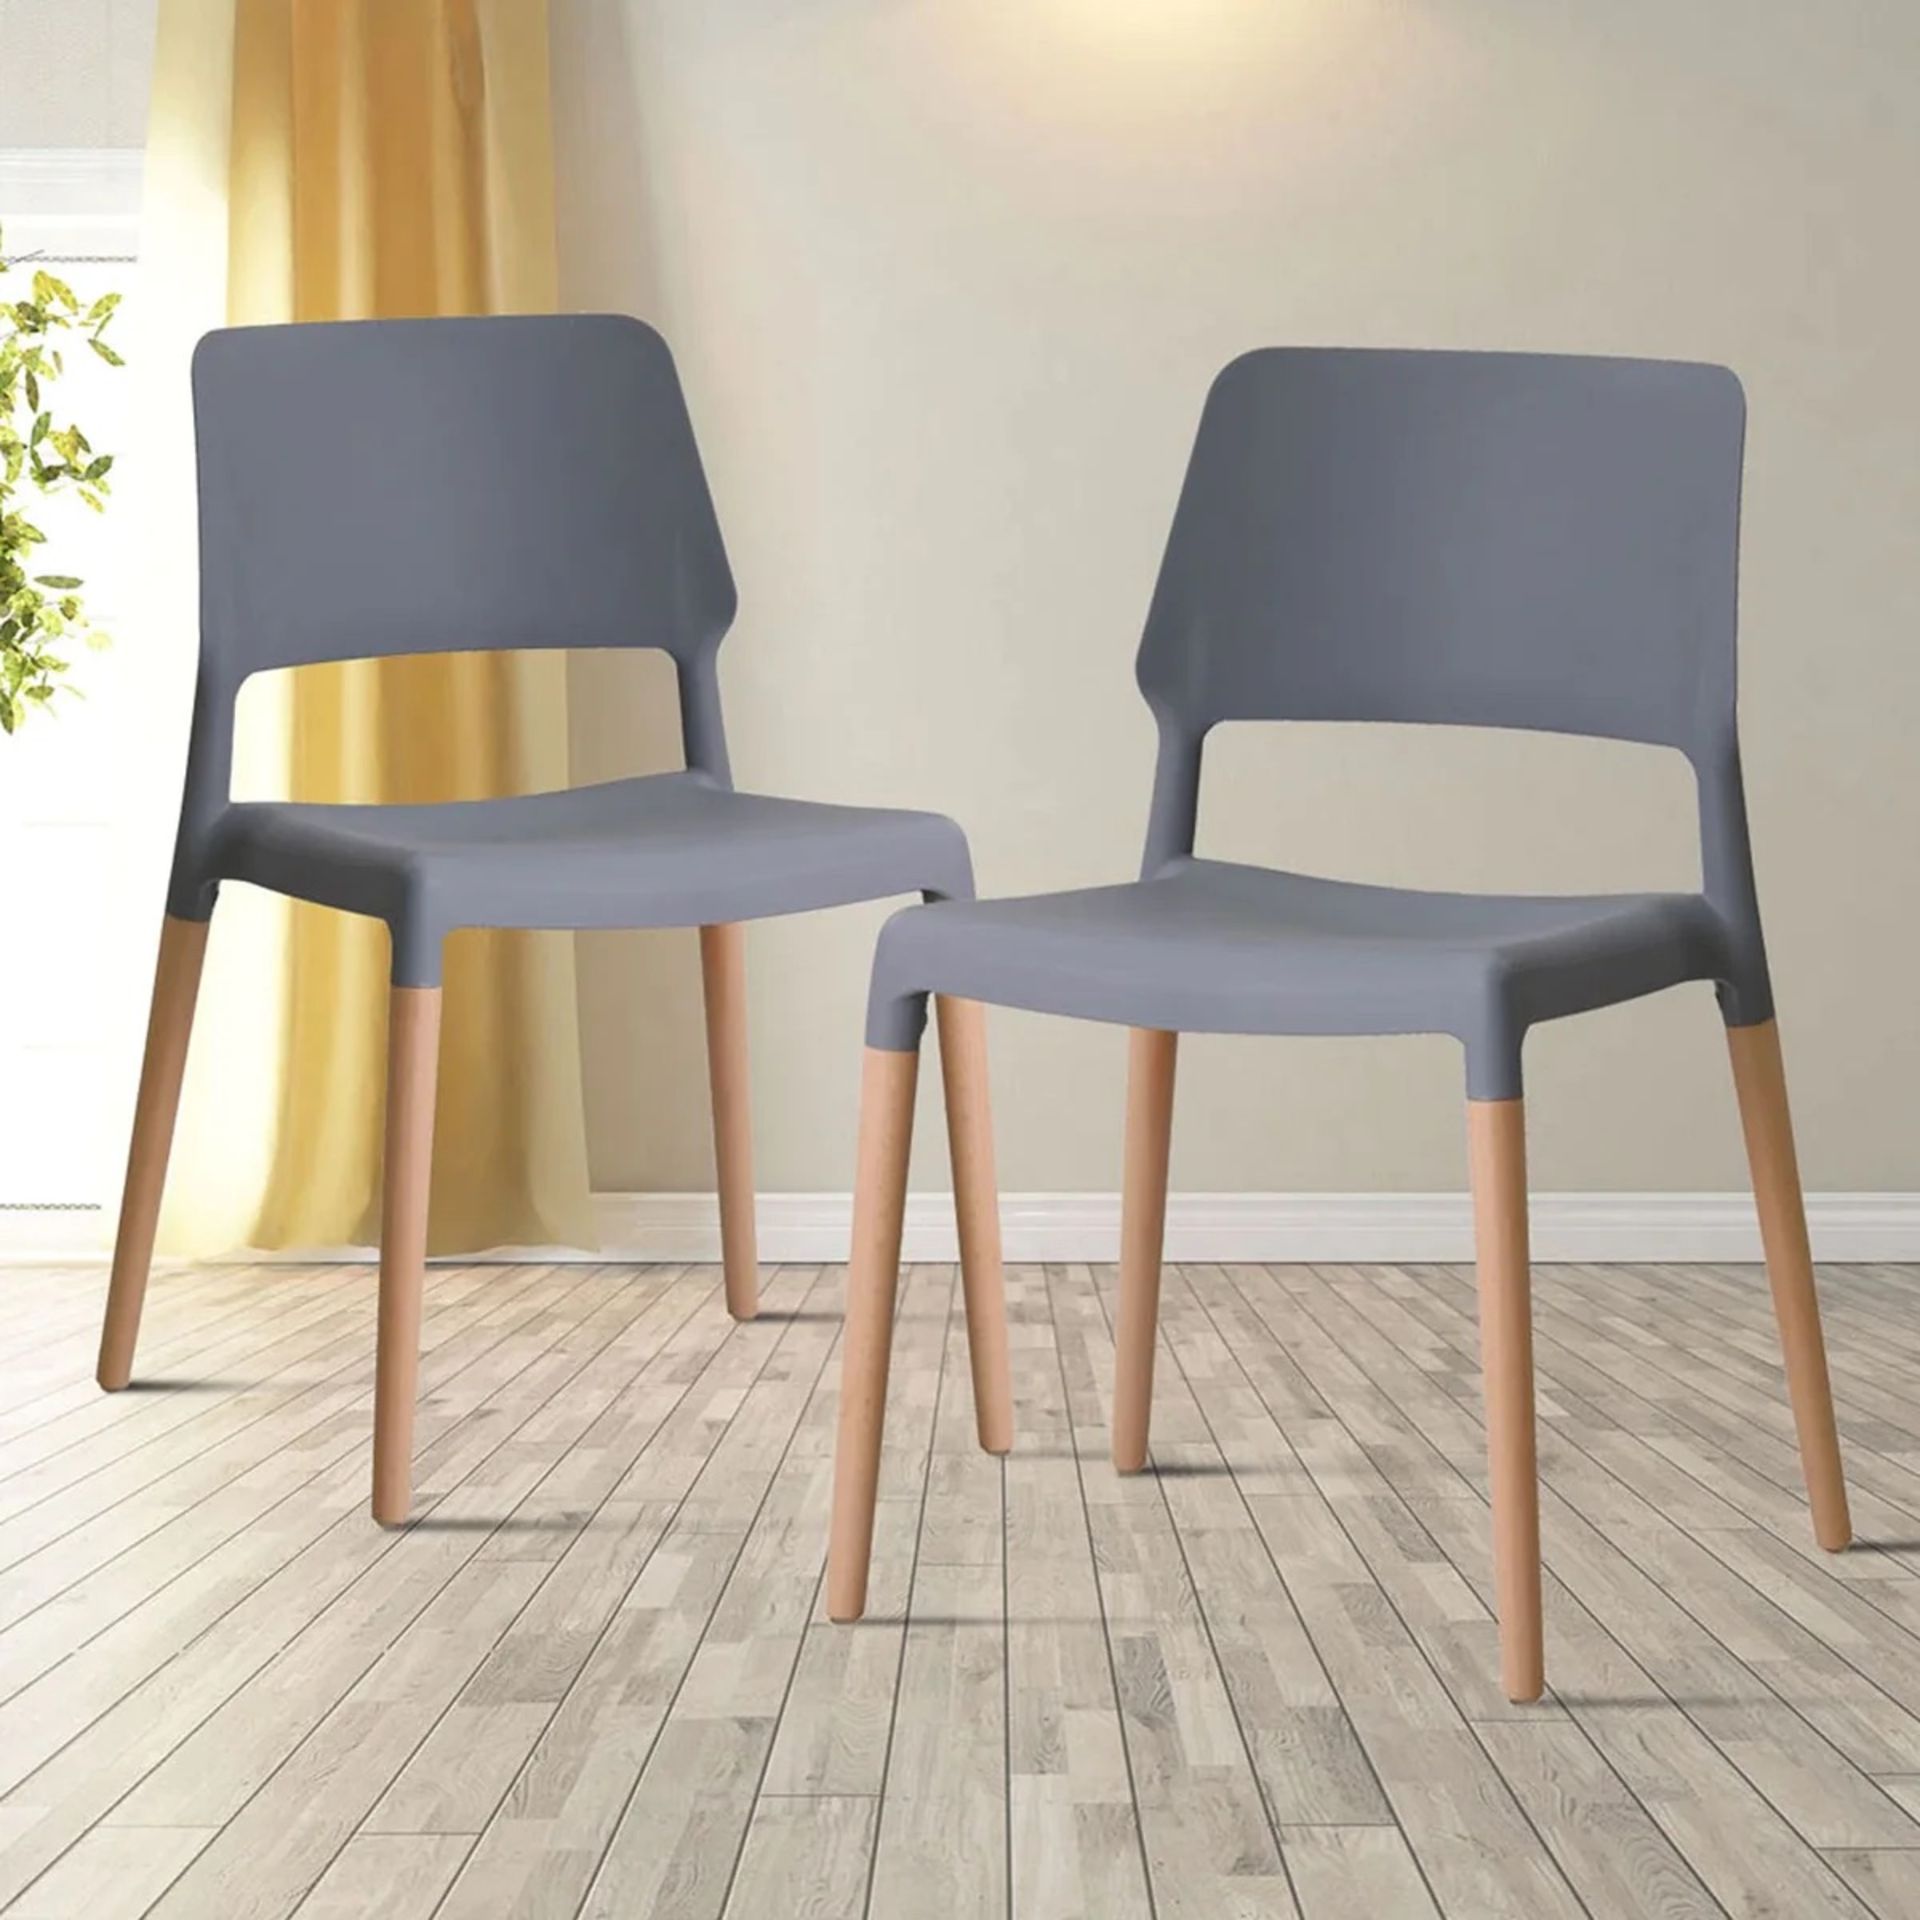 RIVA PAIR OF DINING CHAIRS IN GREY DURABLE PLASTIC - RRP £159 PER PAIR